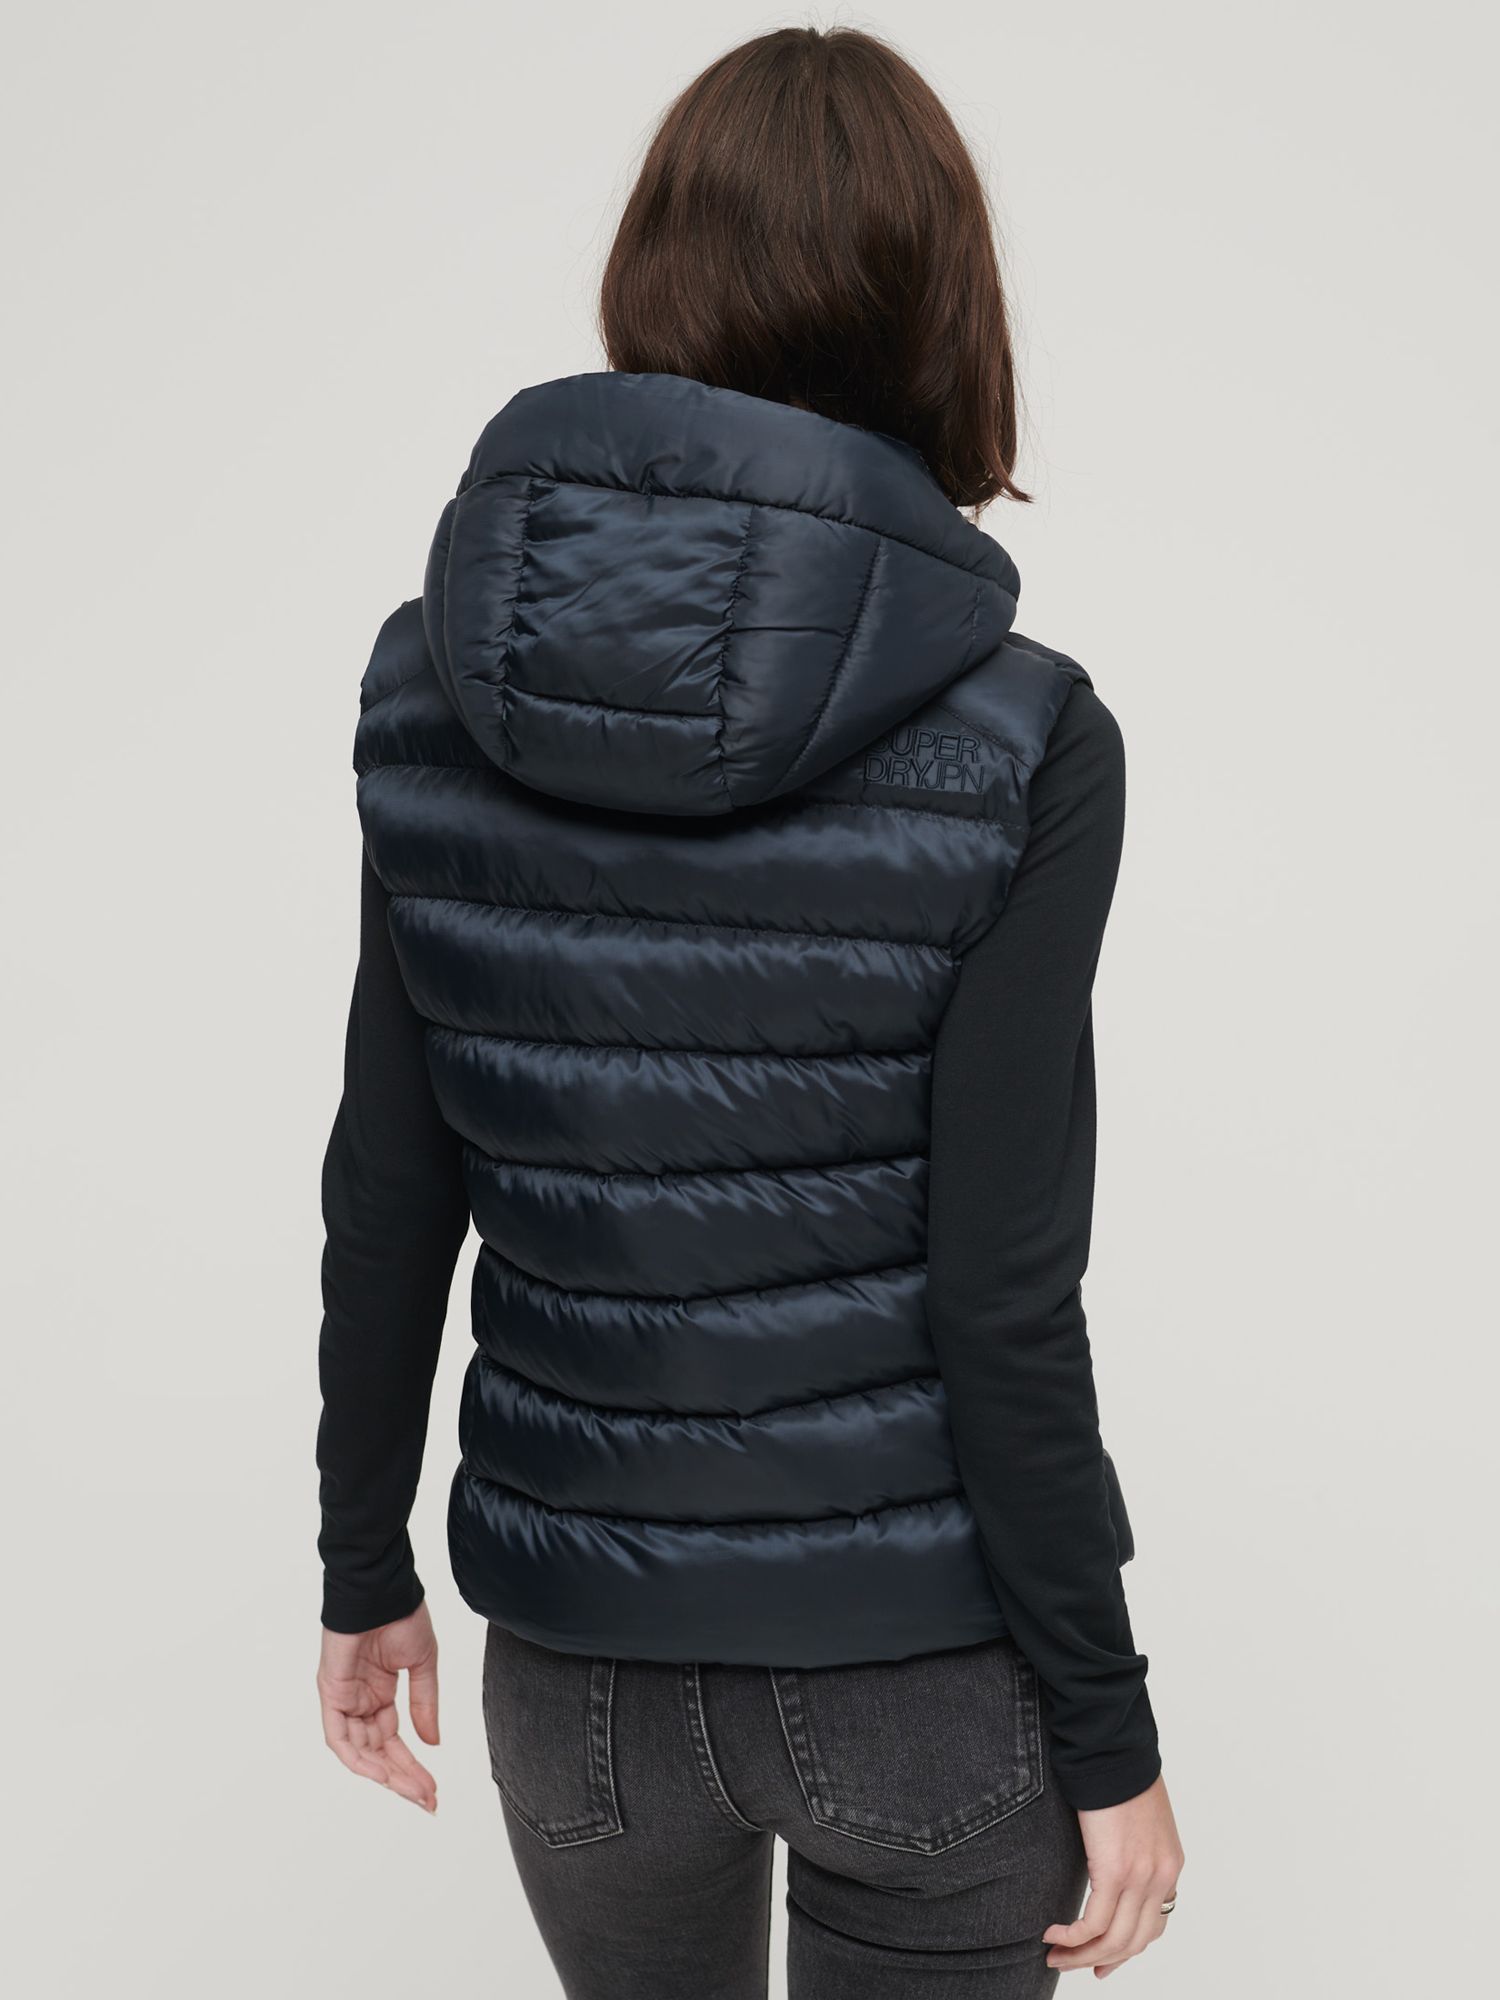 Superdry Hooded Fuji Padded Gilet, Eclipse Navy at John Lewis & Partners